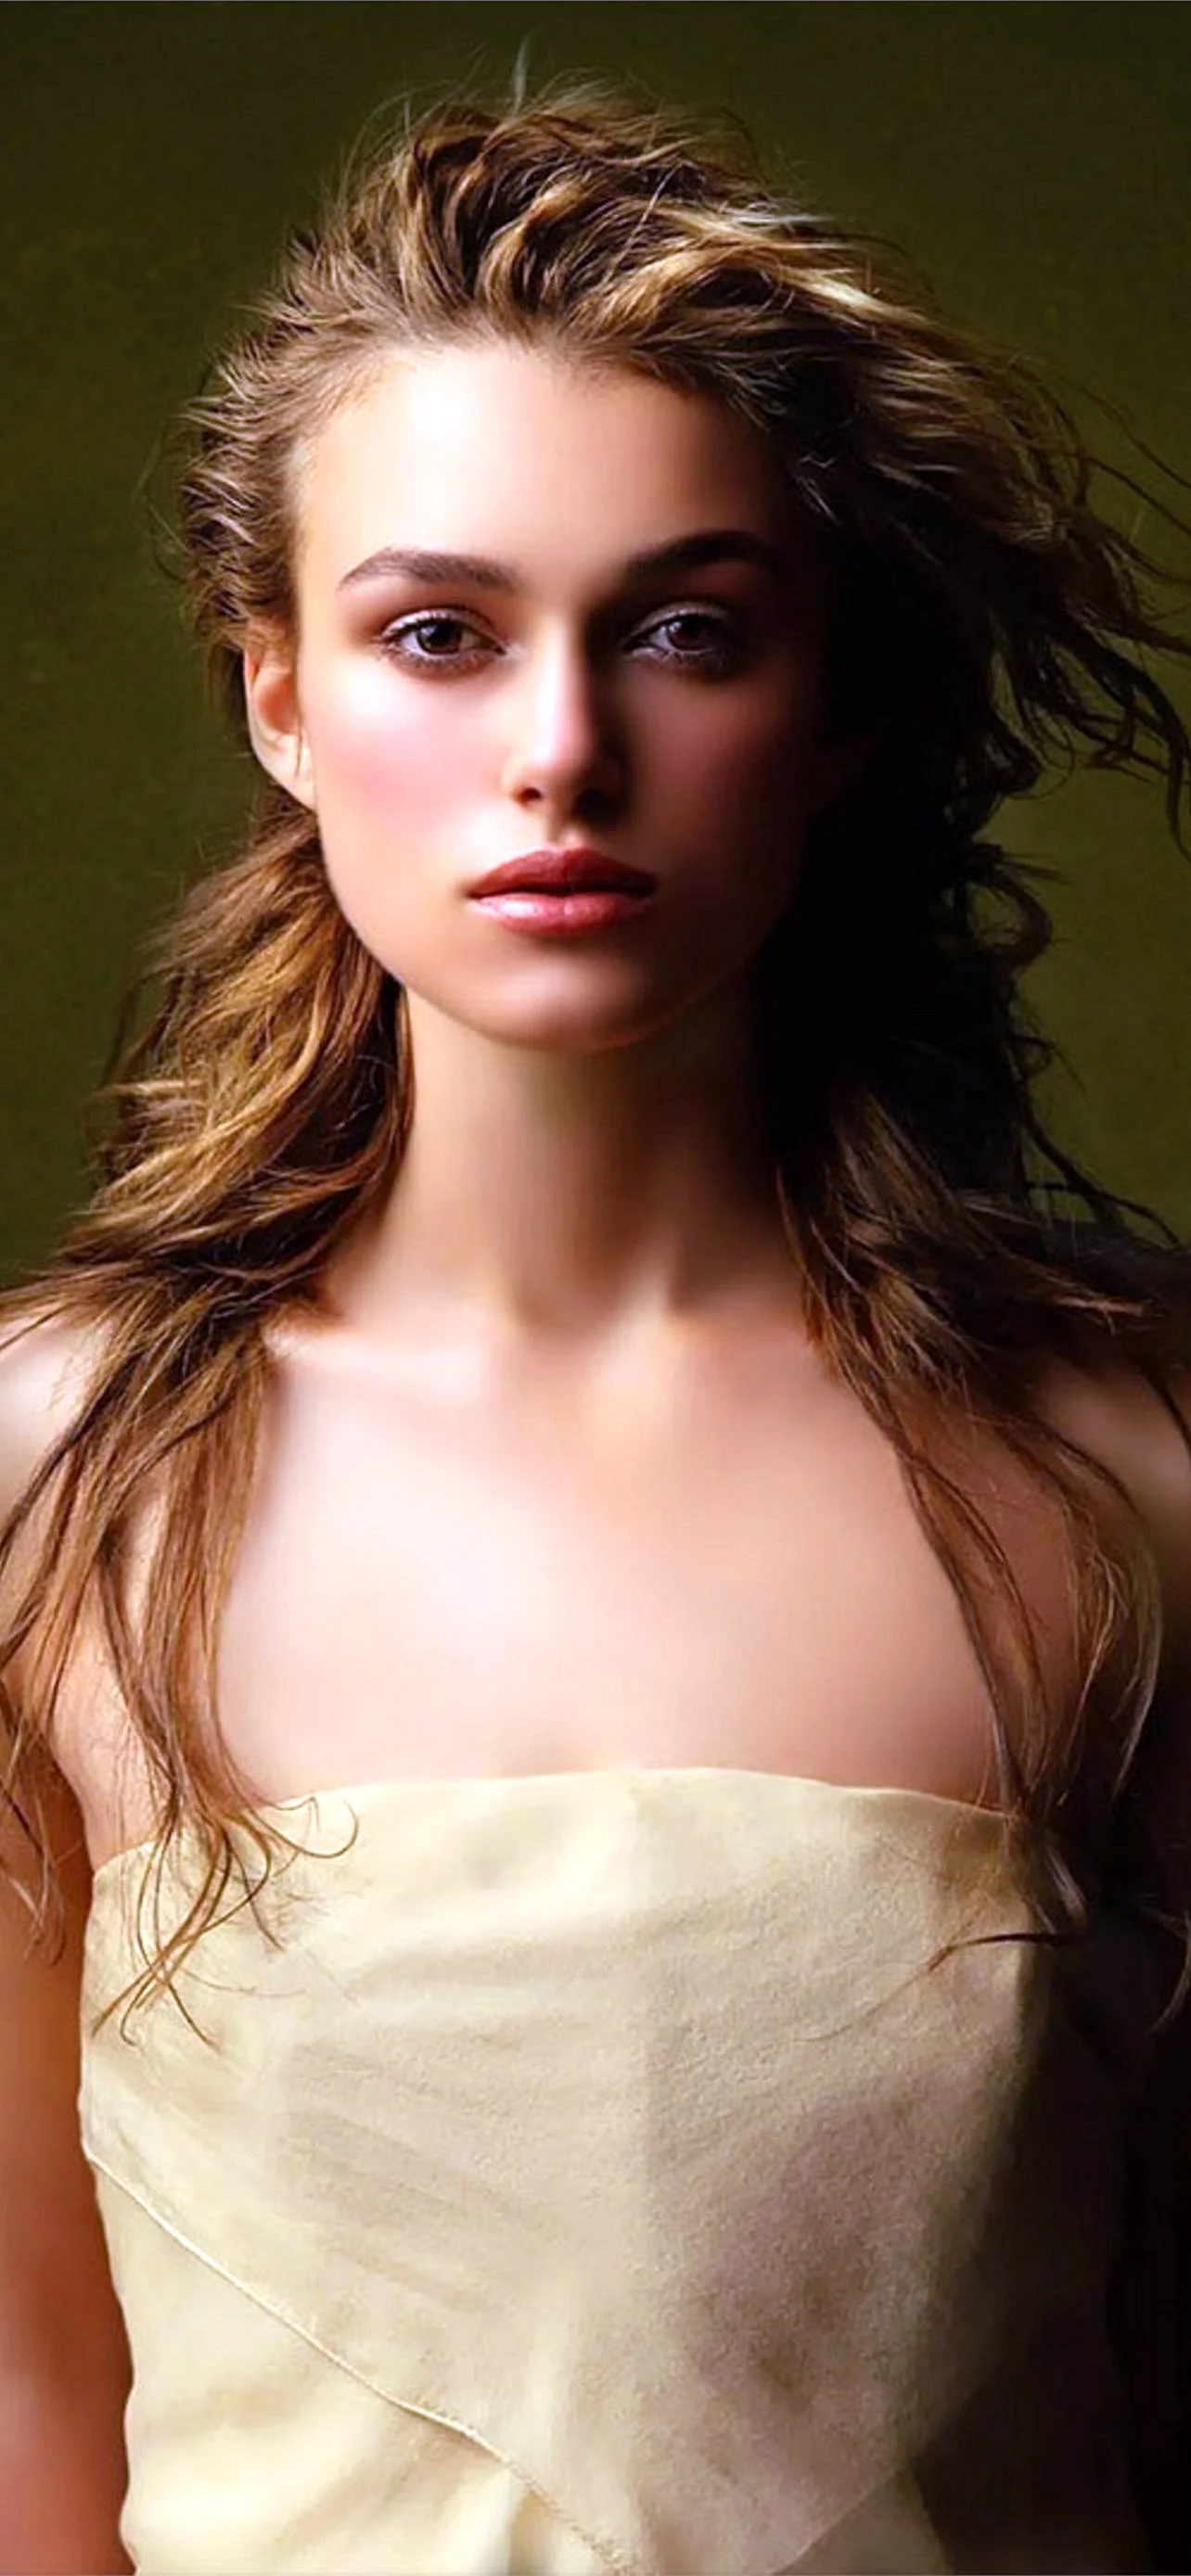 Keira Knightley Wallpaper for iPhone 13 Pro Max